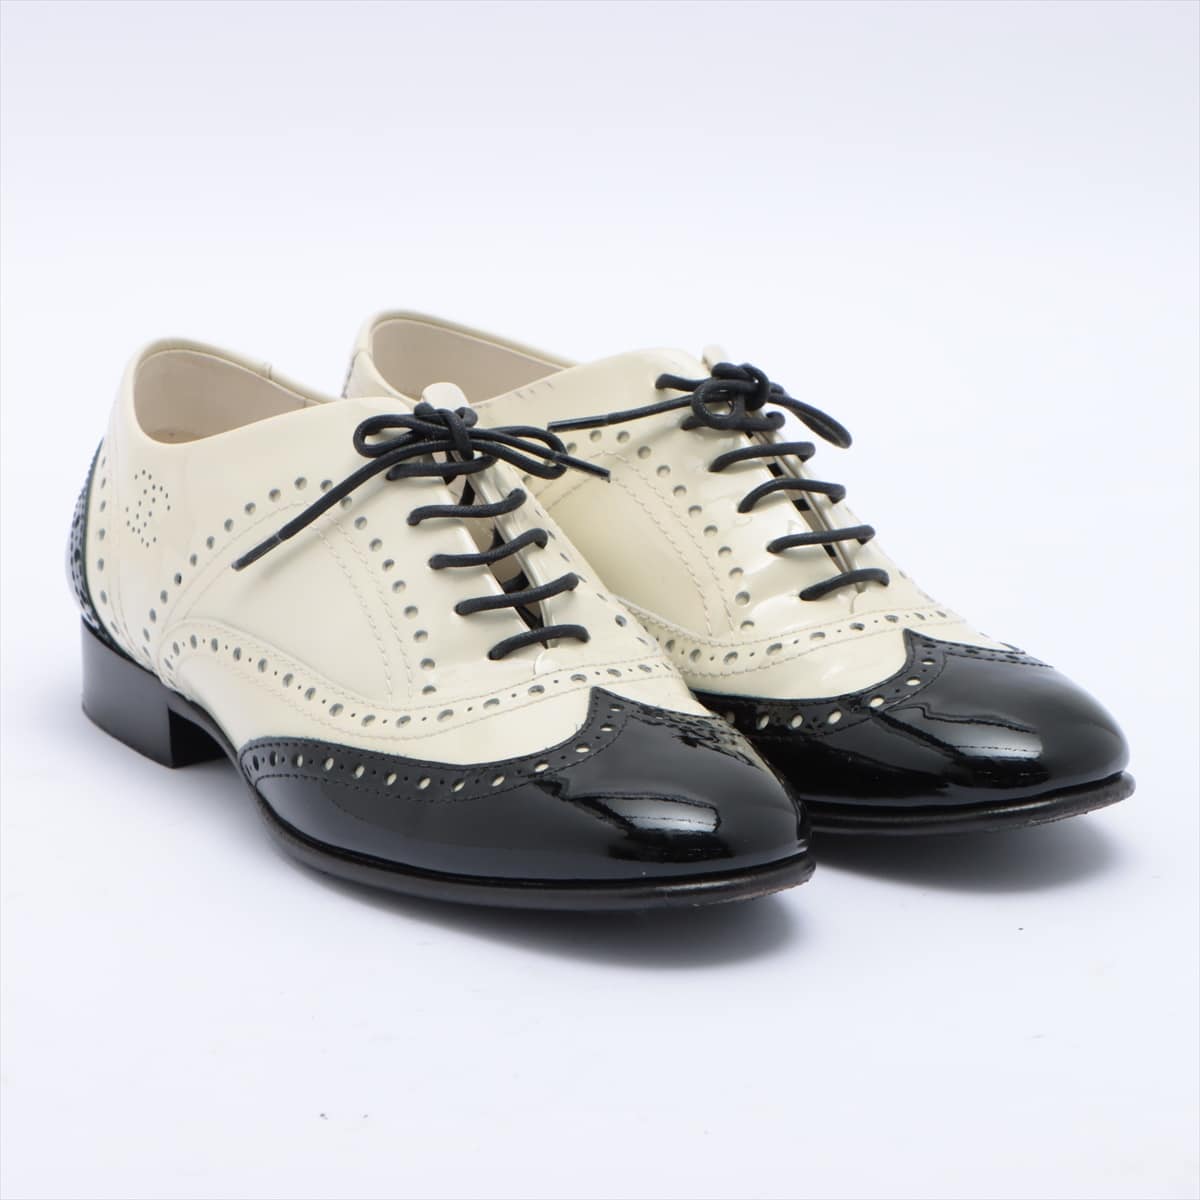 Chanel Patent leather Dress shoes 37 Ladies' Black × White G31213 wingtip